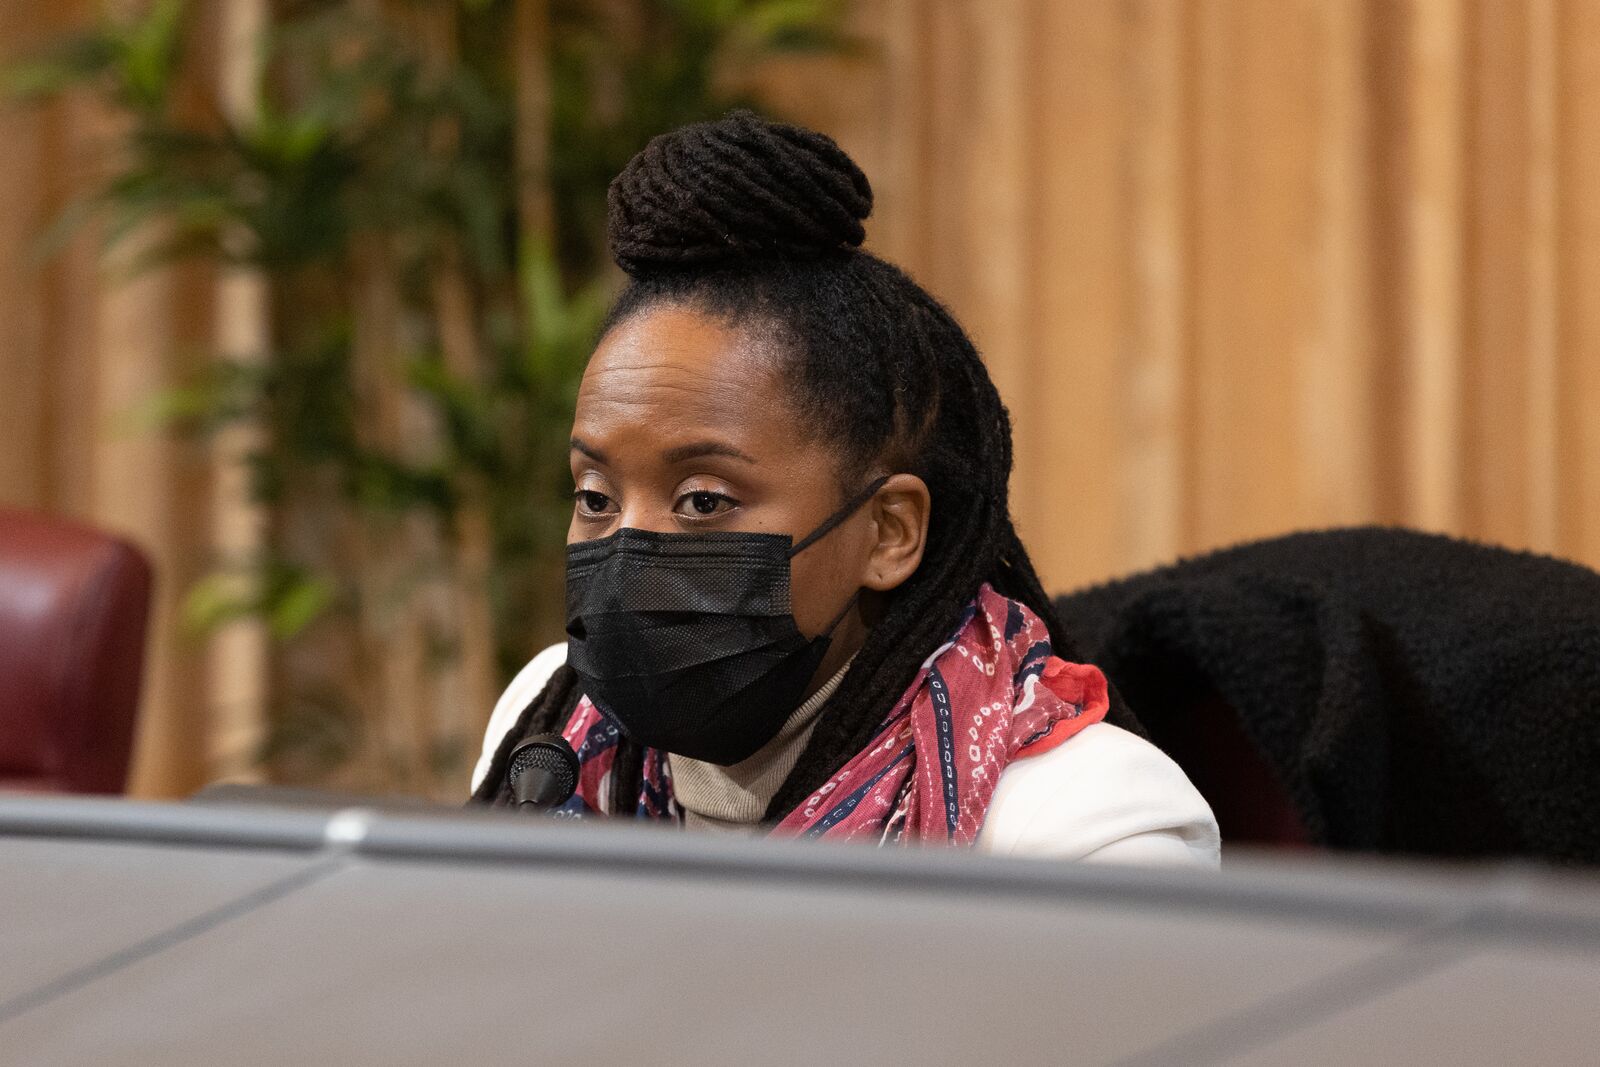 Oakland Councilmember Carroll Fife wearing a mask and speaking into a microphone in the council chambers.